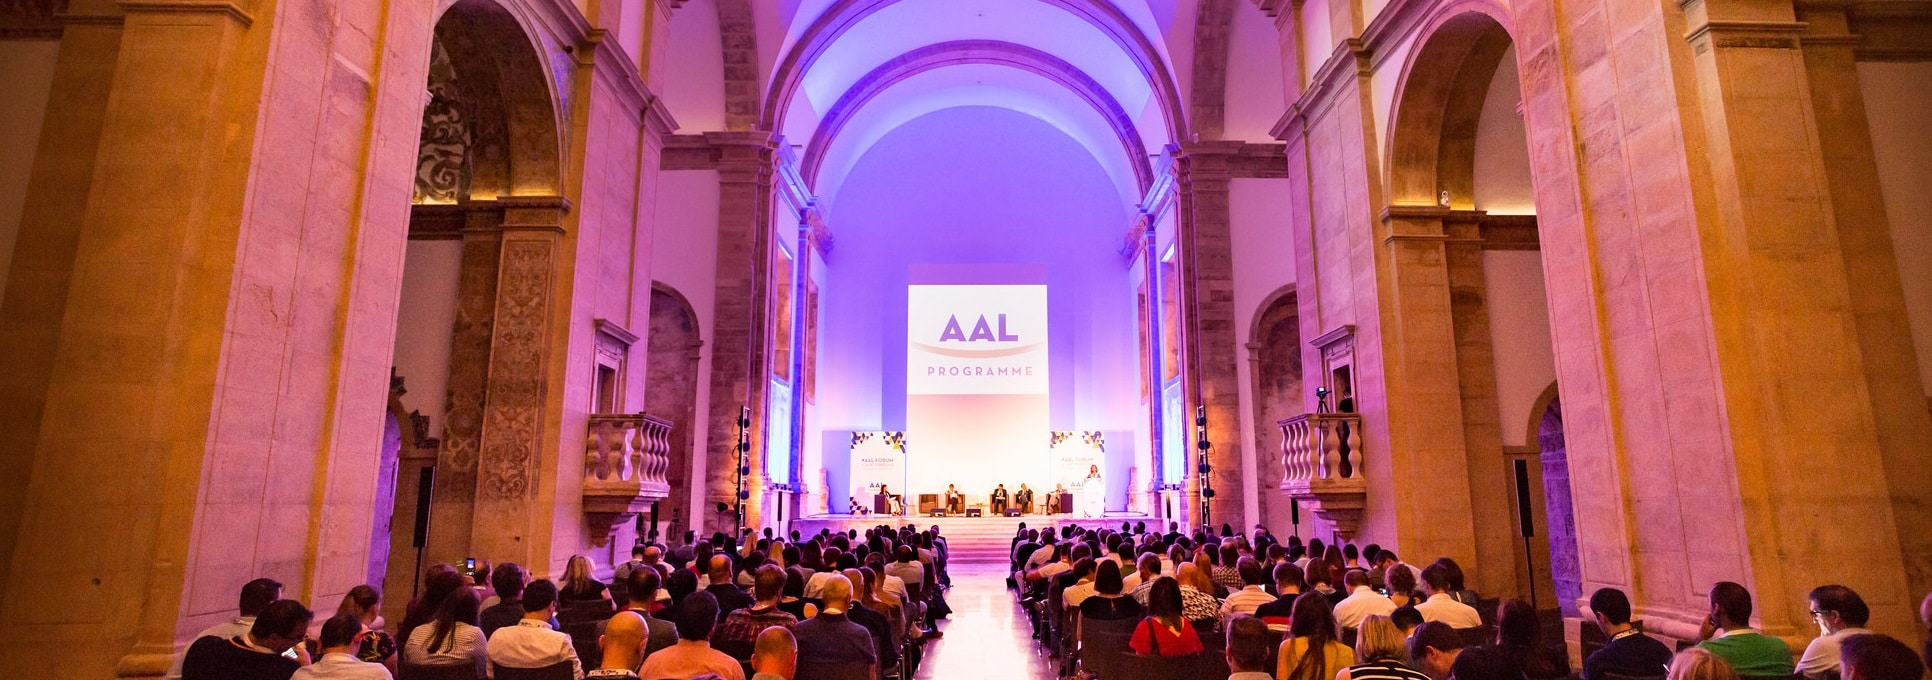 AAL Forum 2017 Plenary session banner